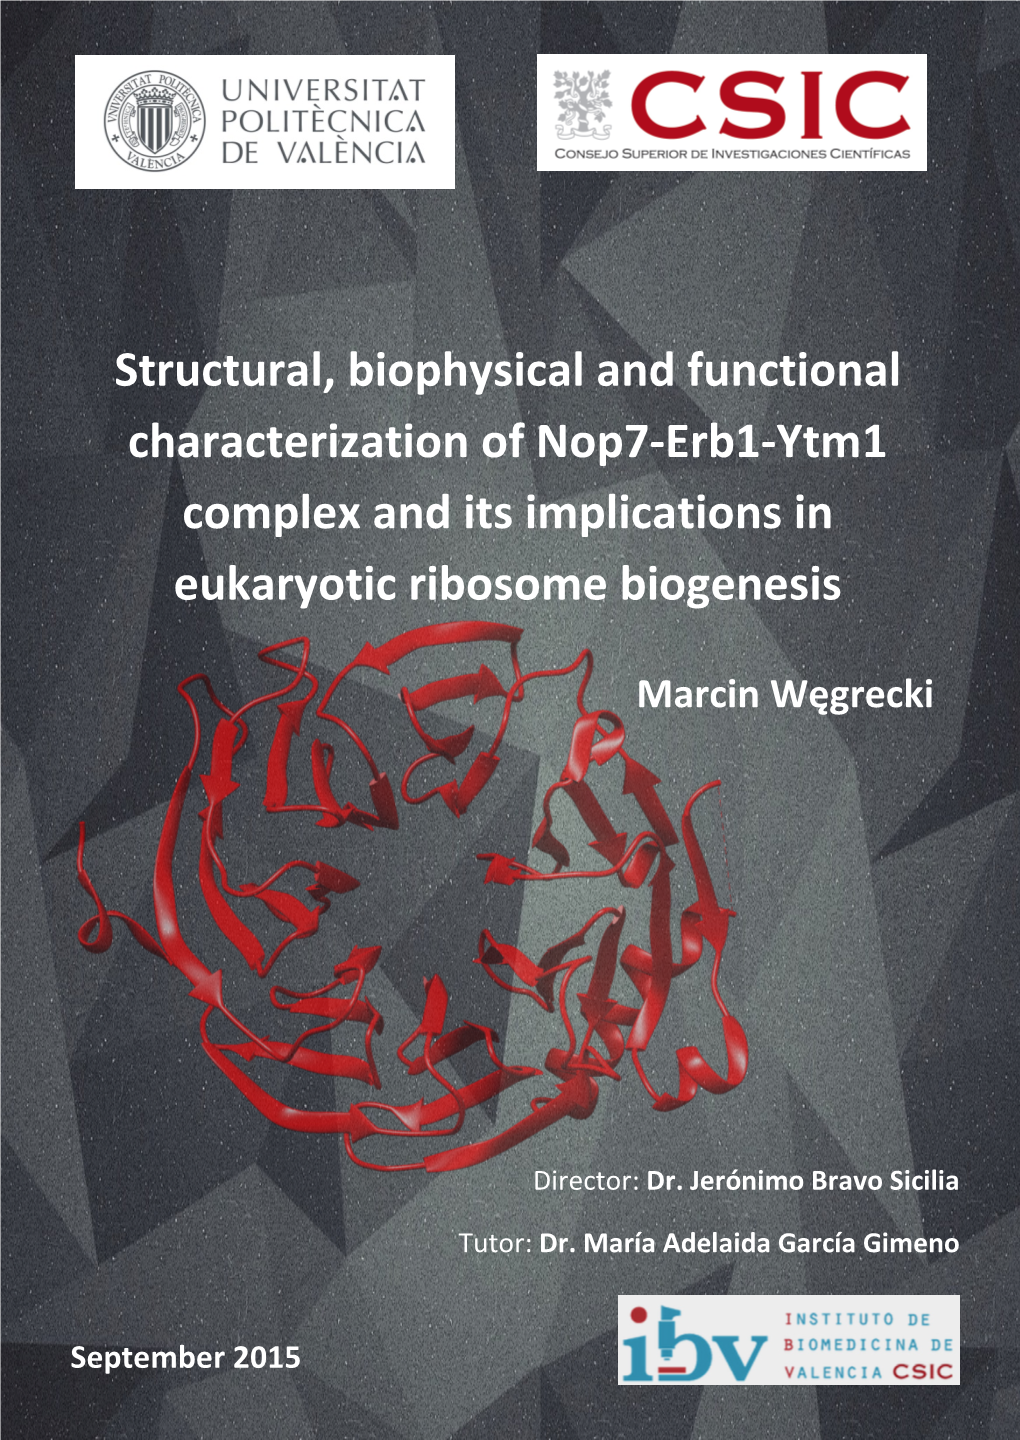 Structural, Biophysical and Functional Characterization of Nop7-Erb1-Ytm1 Complex and Its Implications in Eukaryotic Ribosome Biogenesis